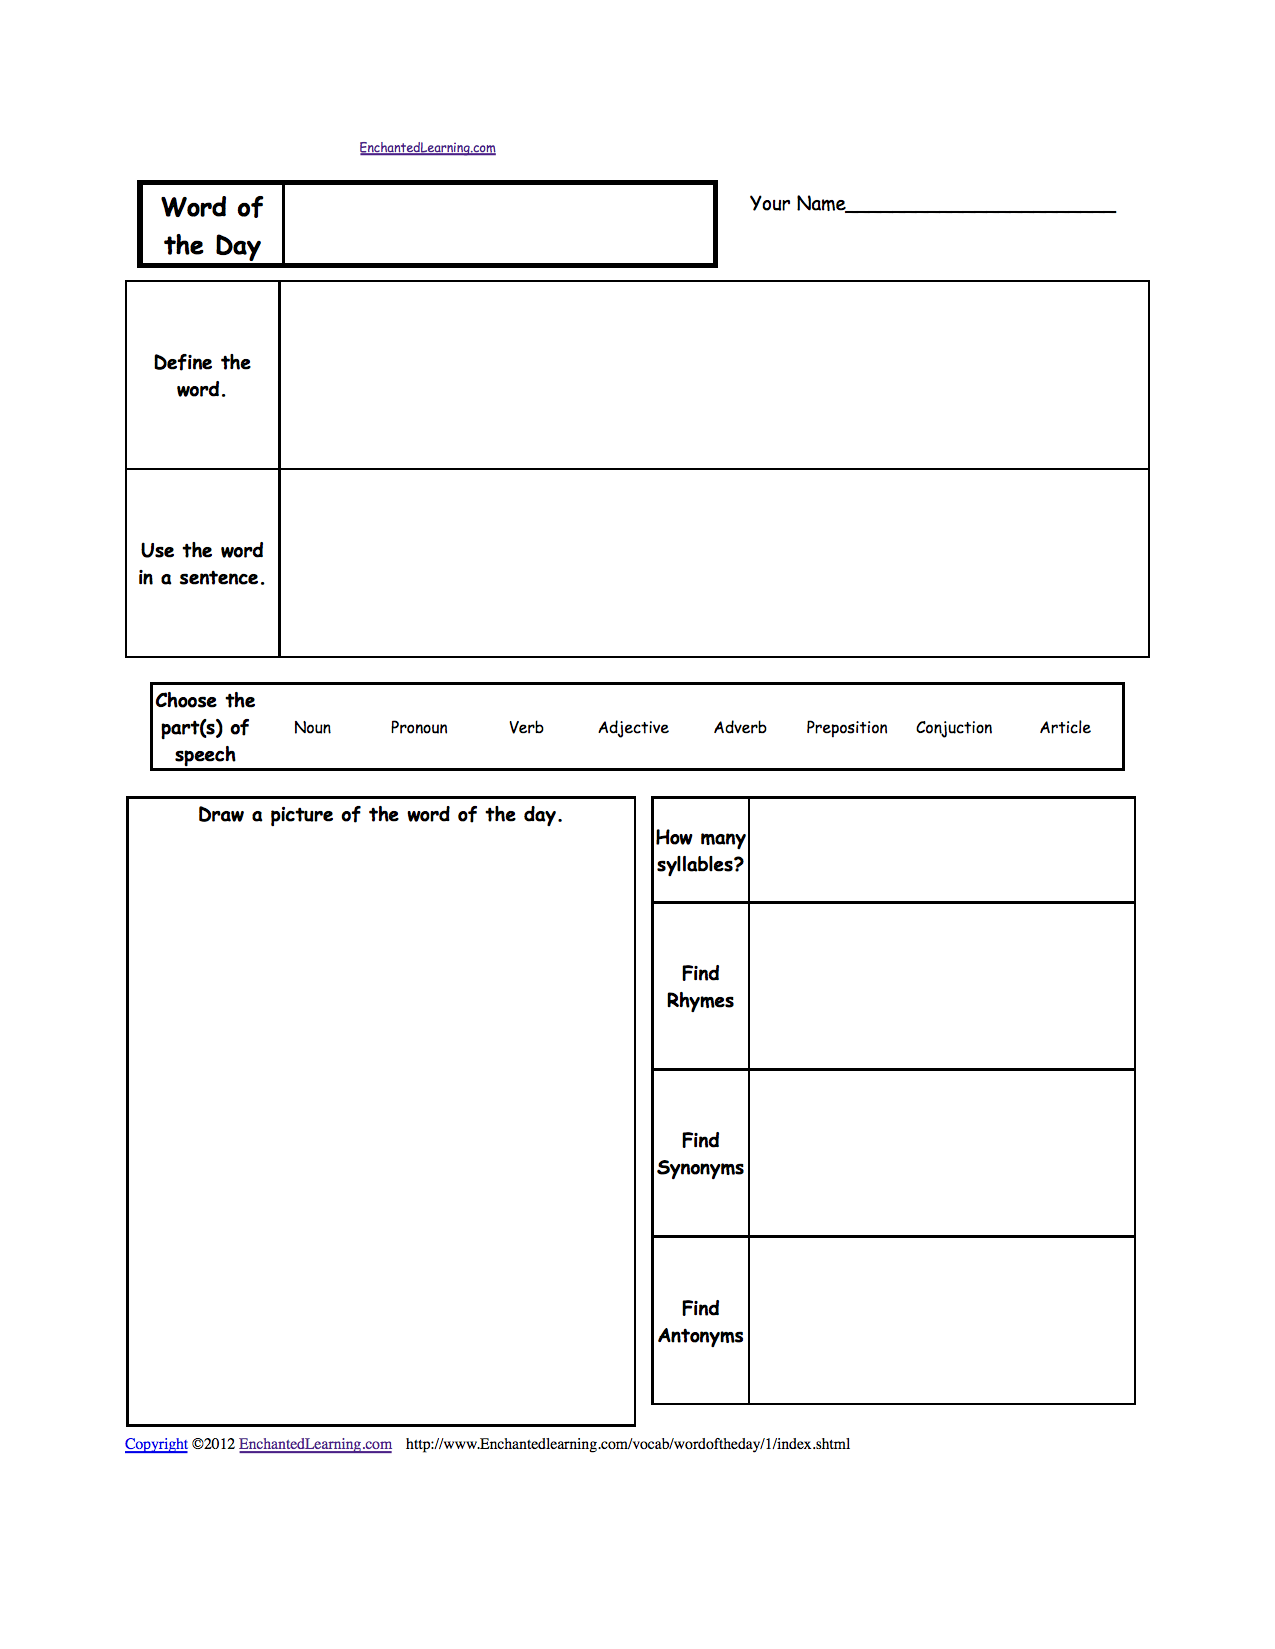 Word of the Day Worksheets - EnchantedLearning.com With Blank Vocabulary Worksheet Template